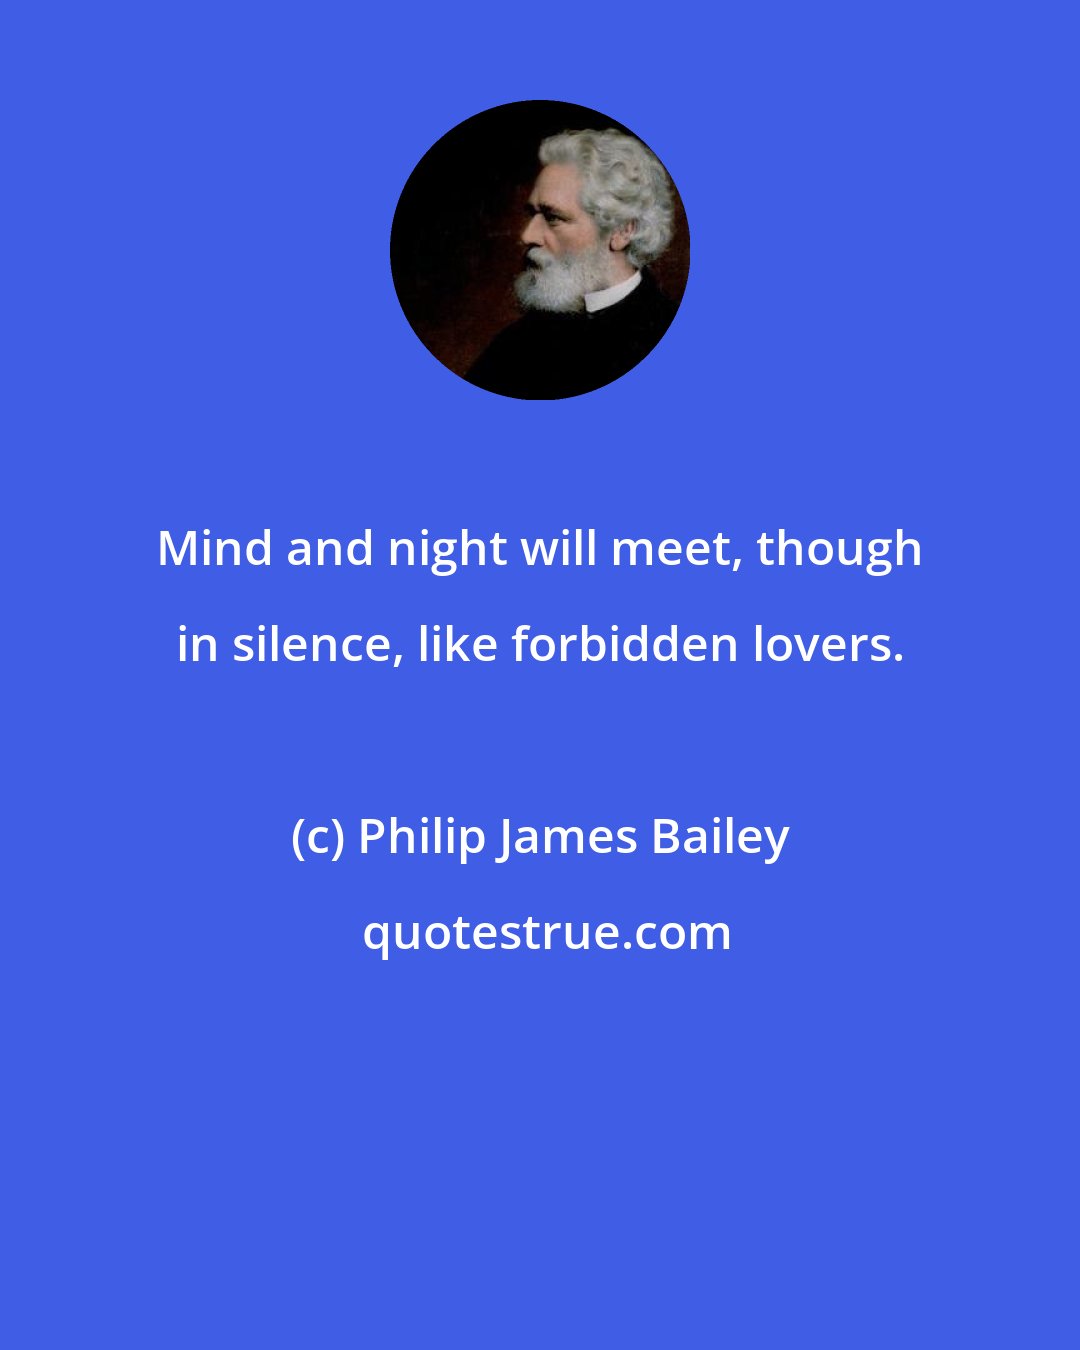 Philip James Bailey: Mind and night will meet, though in silence, like forbidden lovers.